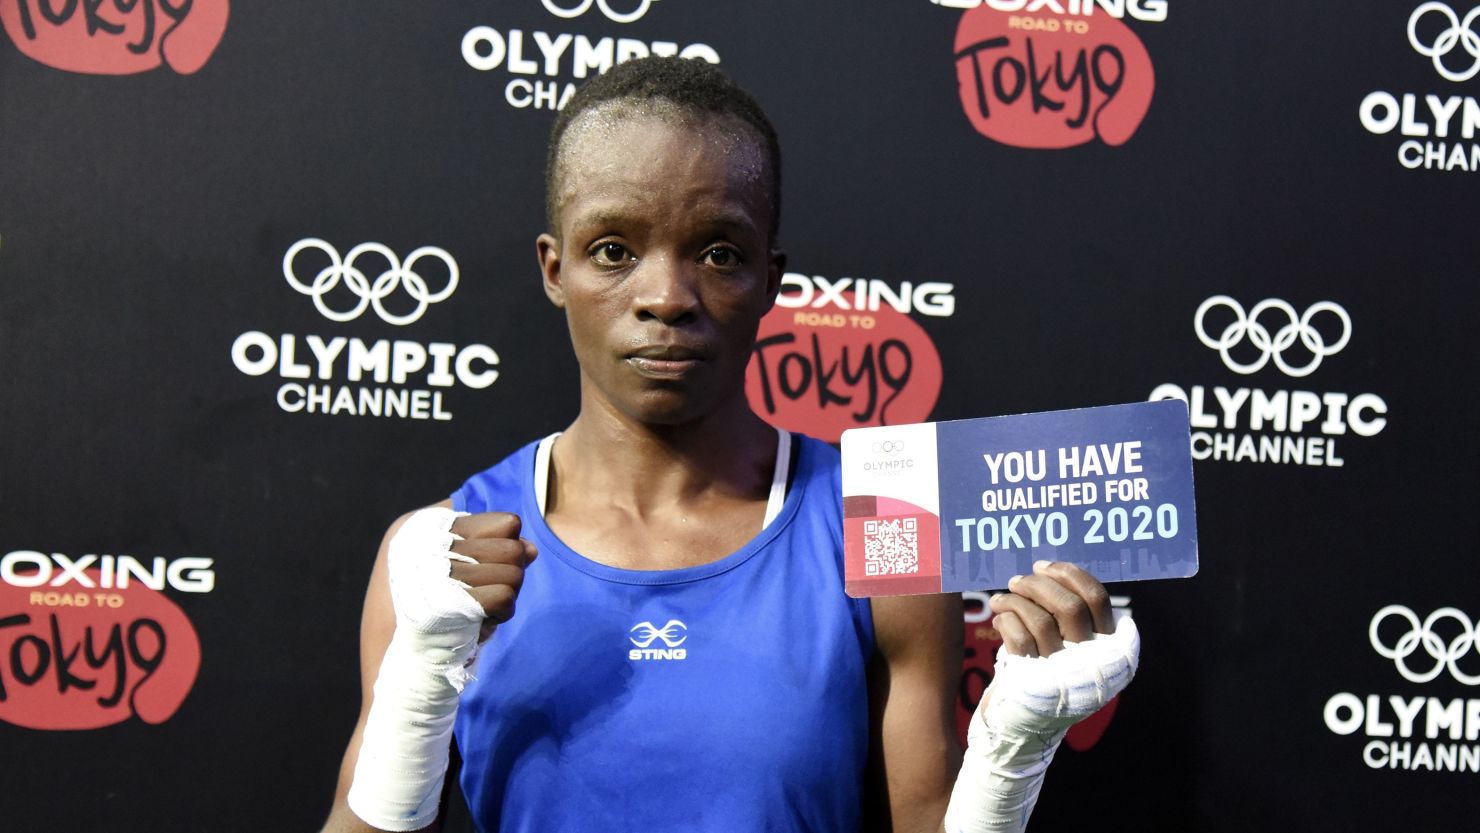 Kenya's Christine Ongare holds her qualifying ticket after her victory against Uganda's Catherine Nanziri during the  Africa Boxing Olympic Qualification tournament in Dakar, Senegal on Saturday.